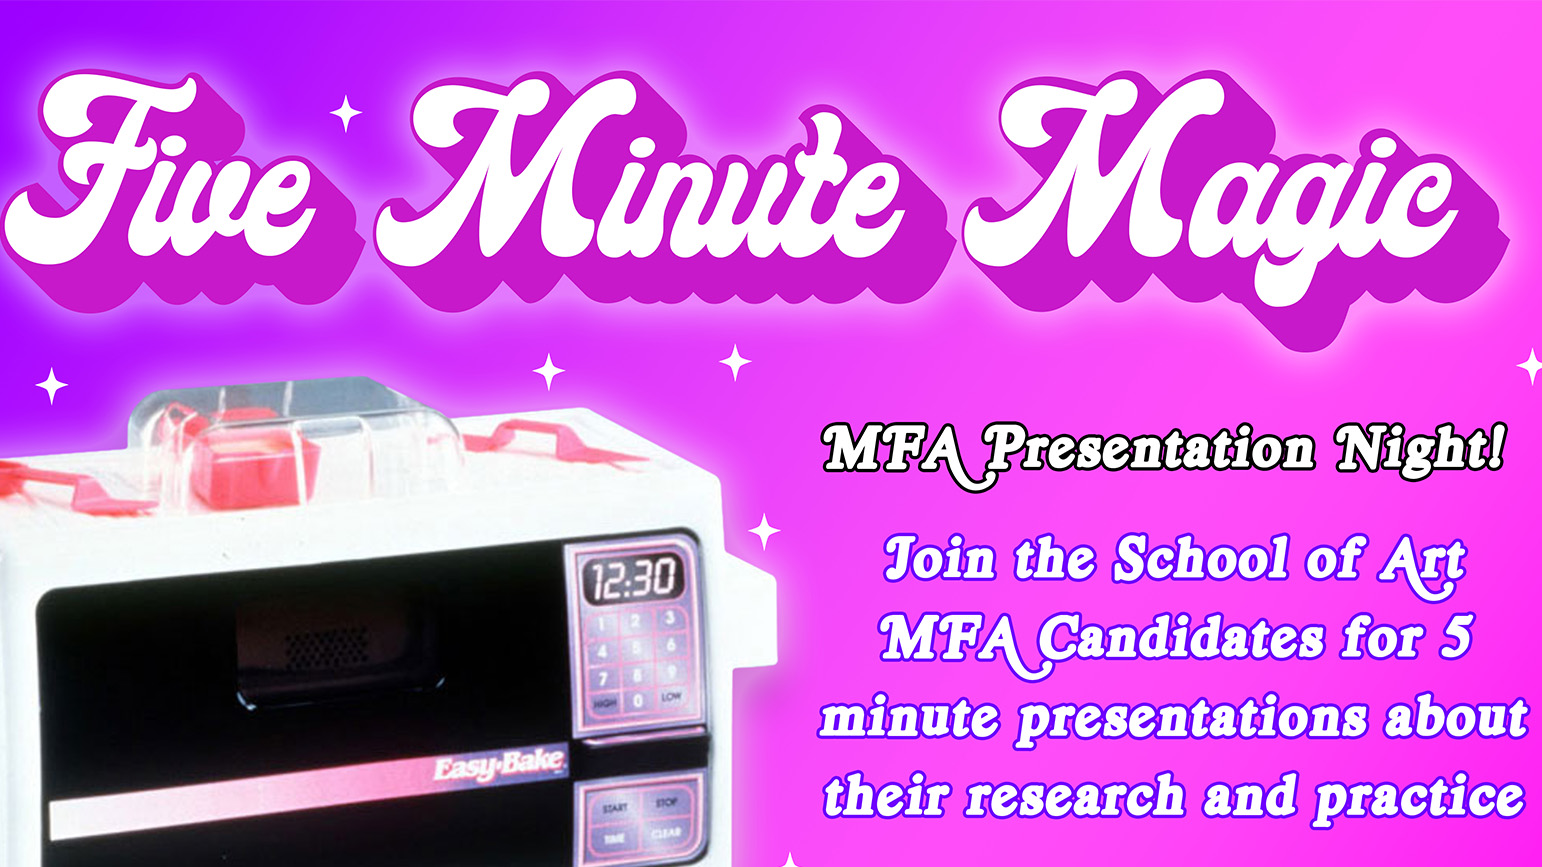 Image of an Easy Bake Oven with the words "Five Minute Magic"